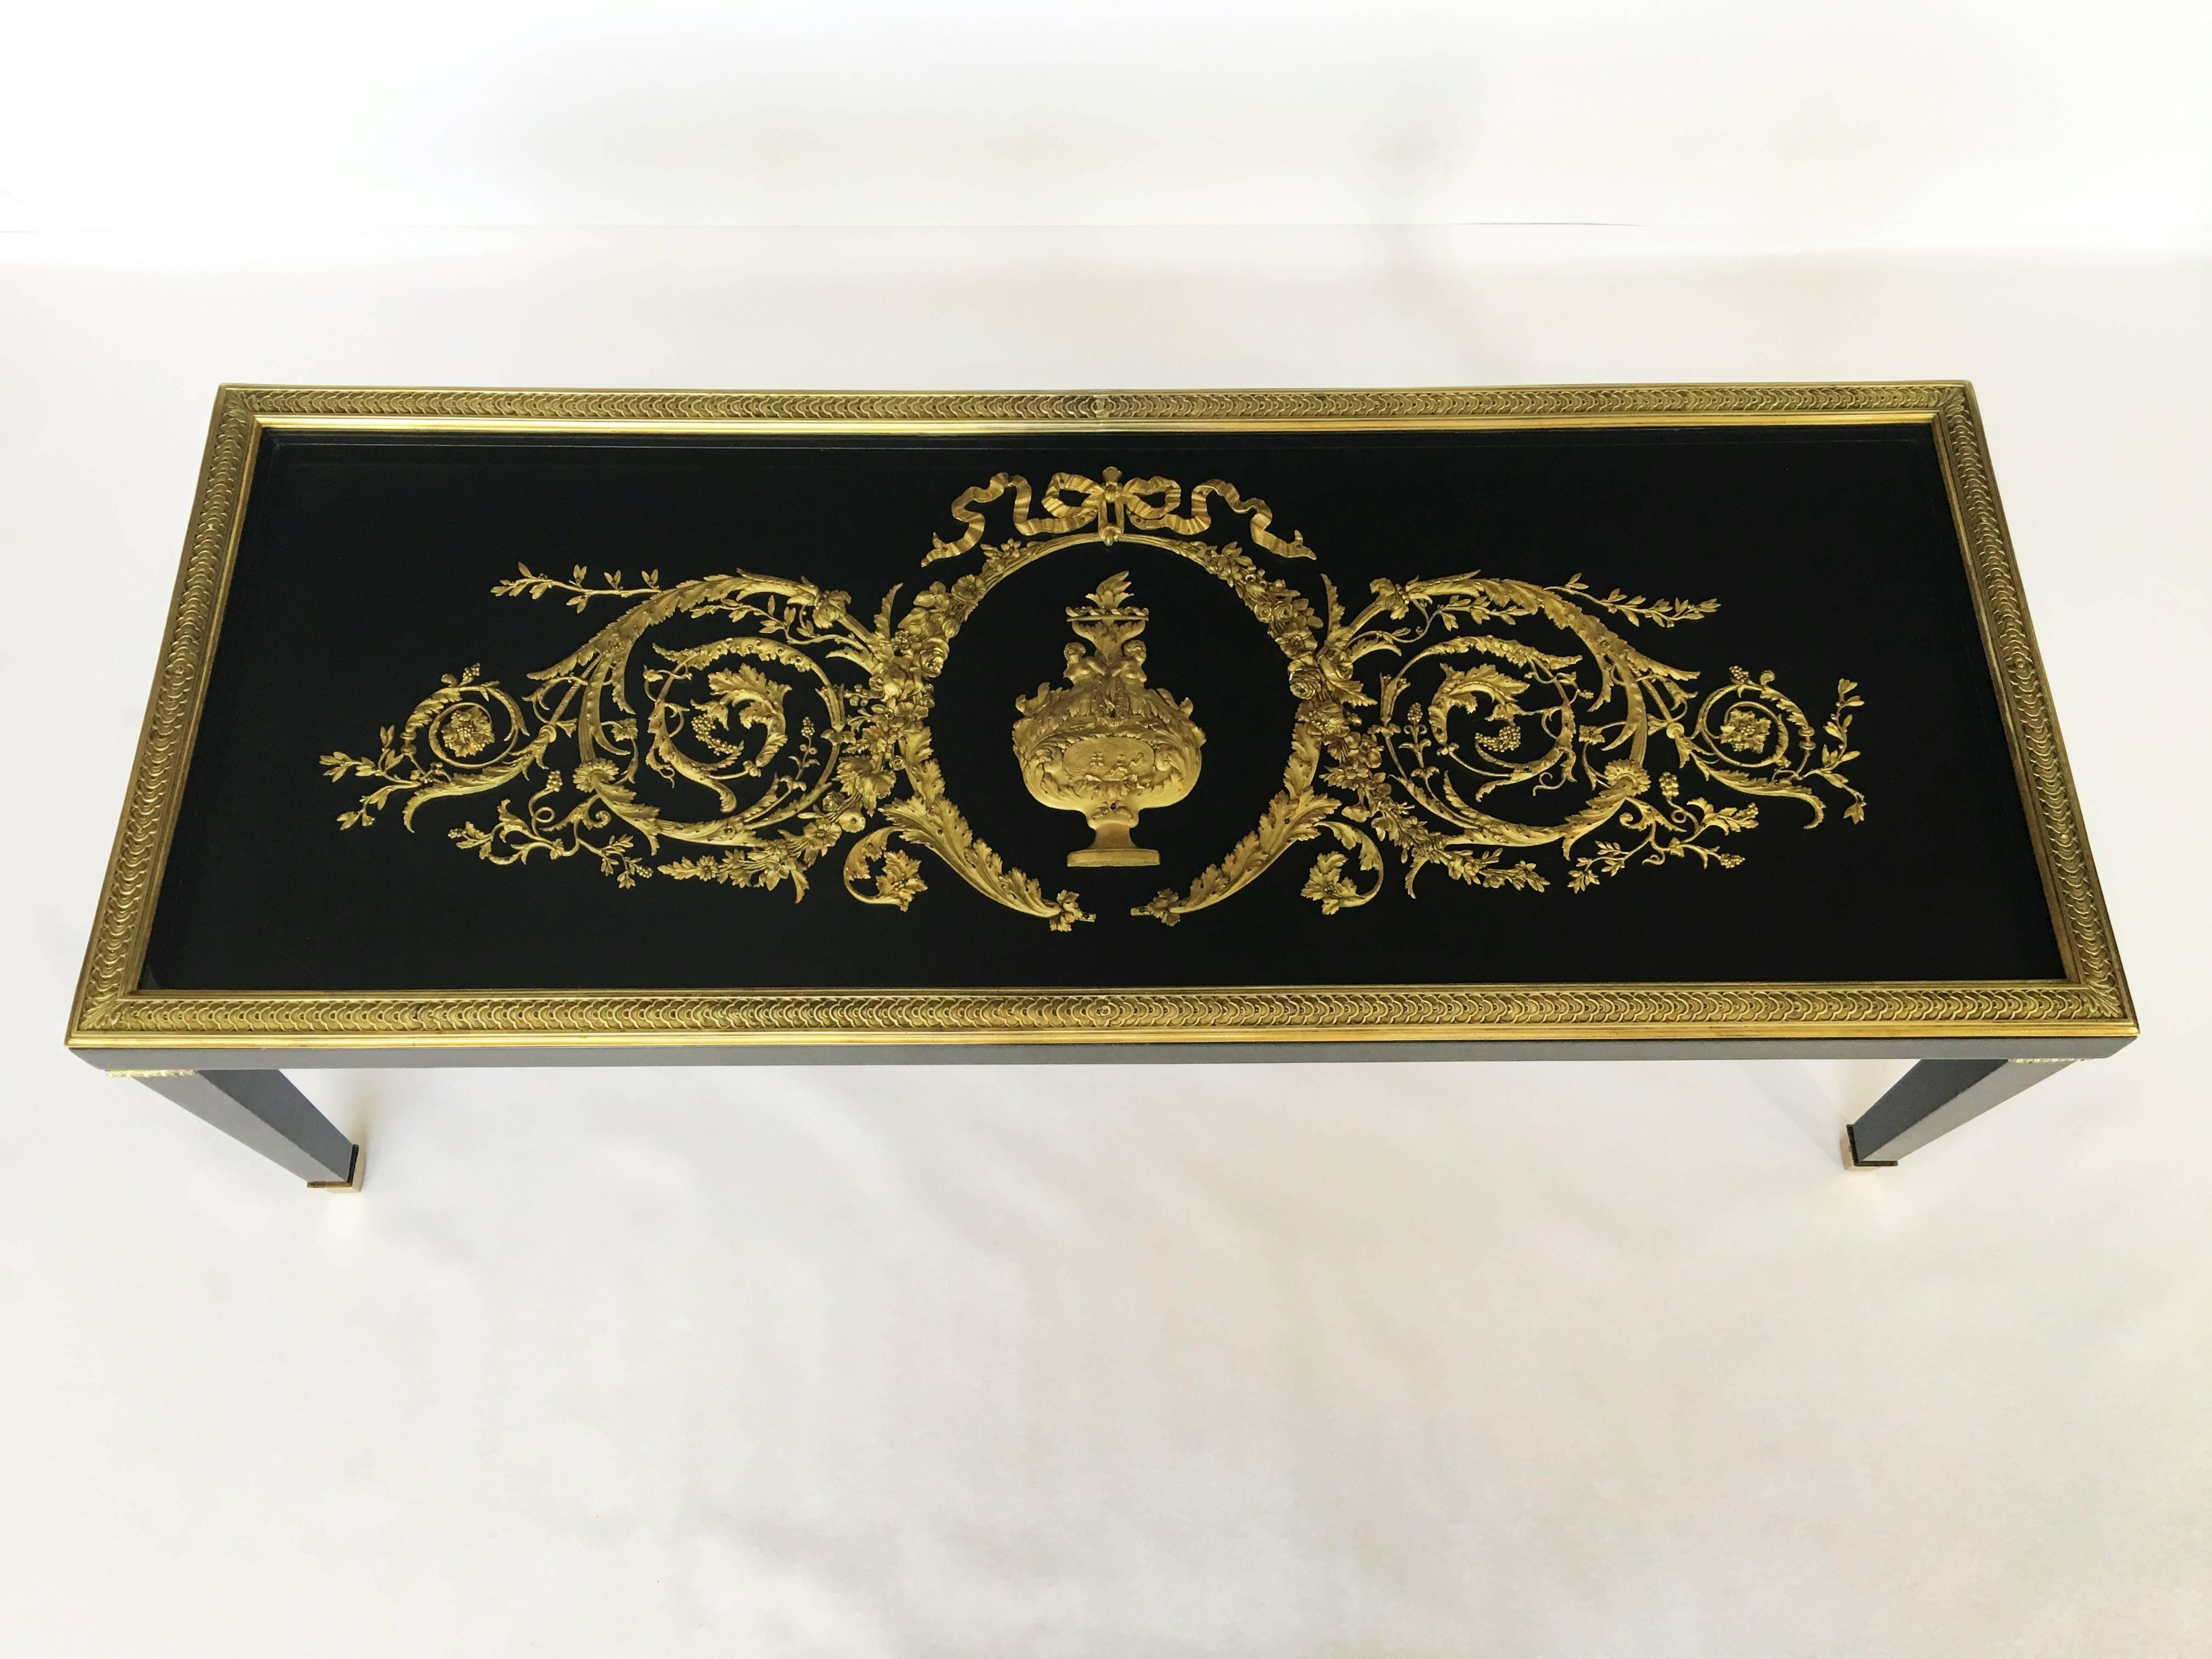 A rare ebonized frame, glass top and gilt brass-mounted centre table attributed to Alfred-Emmanuel Beurdeley. Adorned with finely cast gilt bronze scrolls, with reliefs of female figures surmounted by ribbon ties and flanked by foliage and laurel